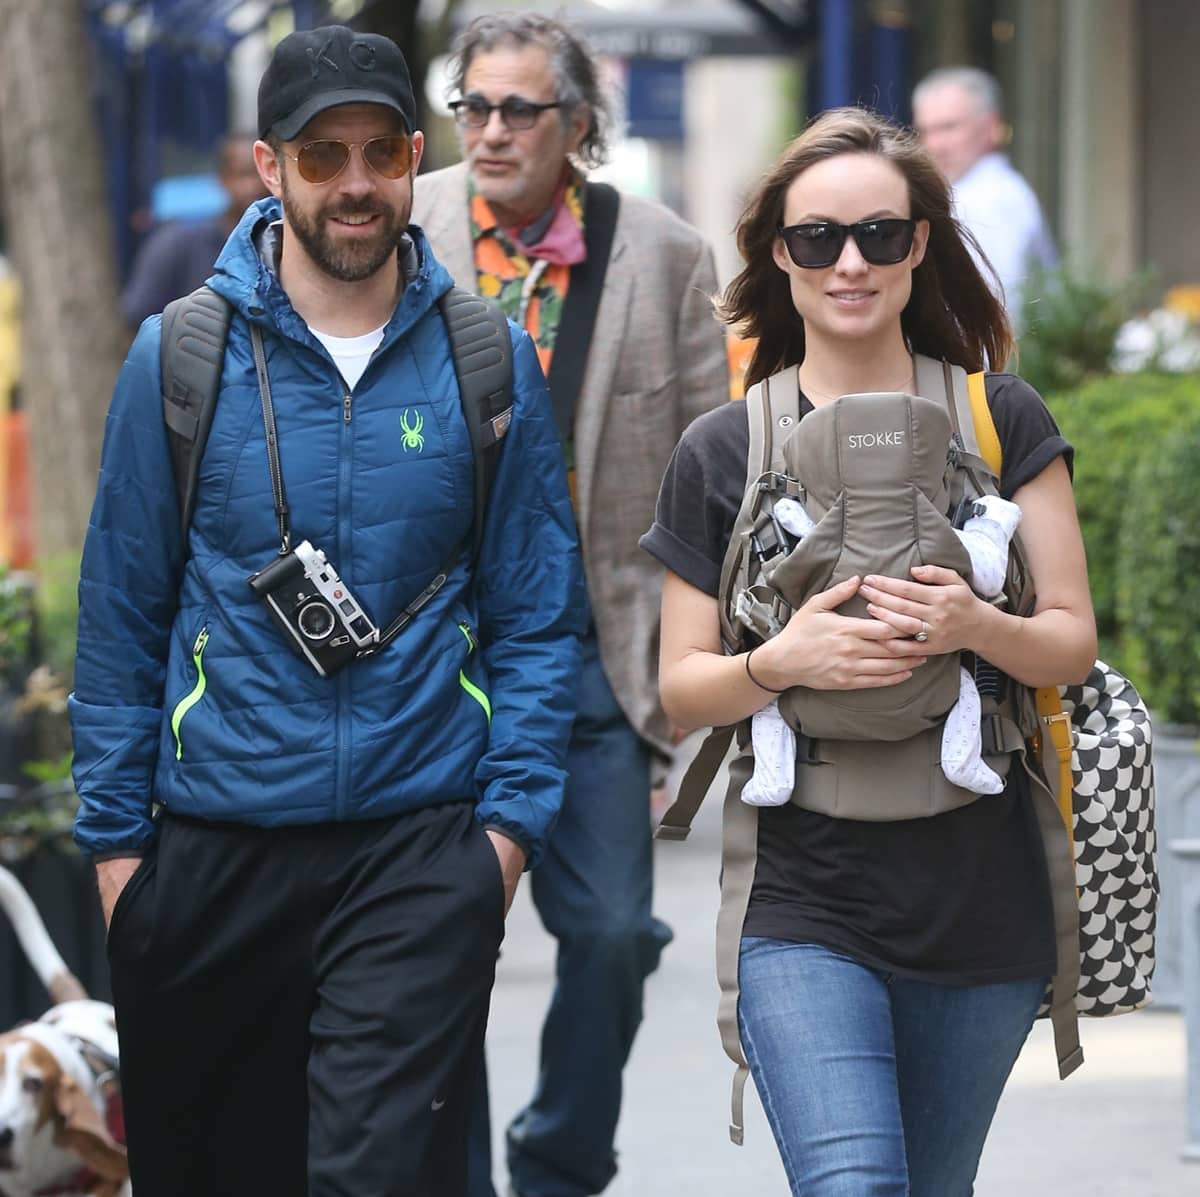 Olivia Wilde, Jason Sudeikis, and their newborn son, Otis Alexander, are out for a walk in New York City